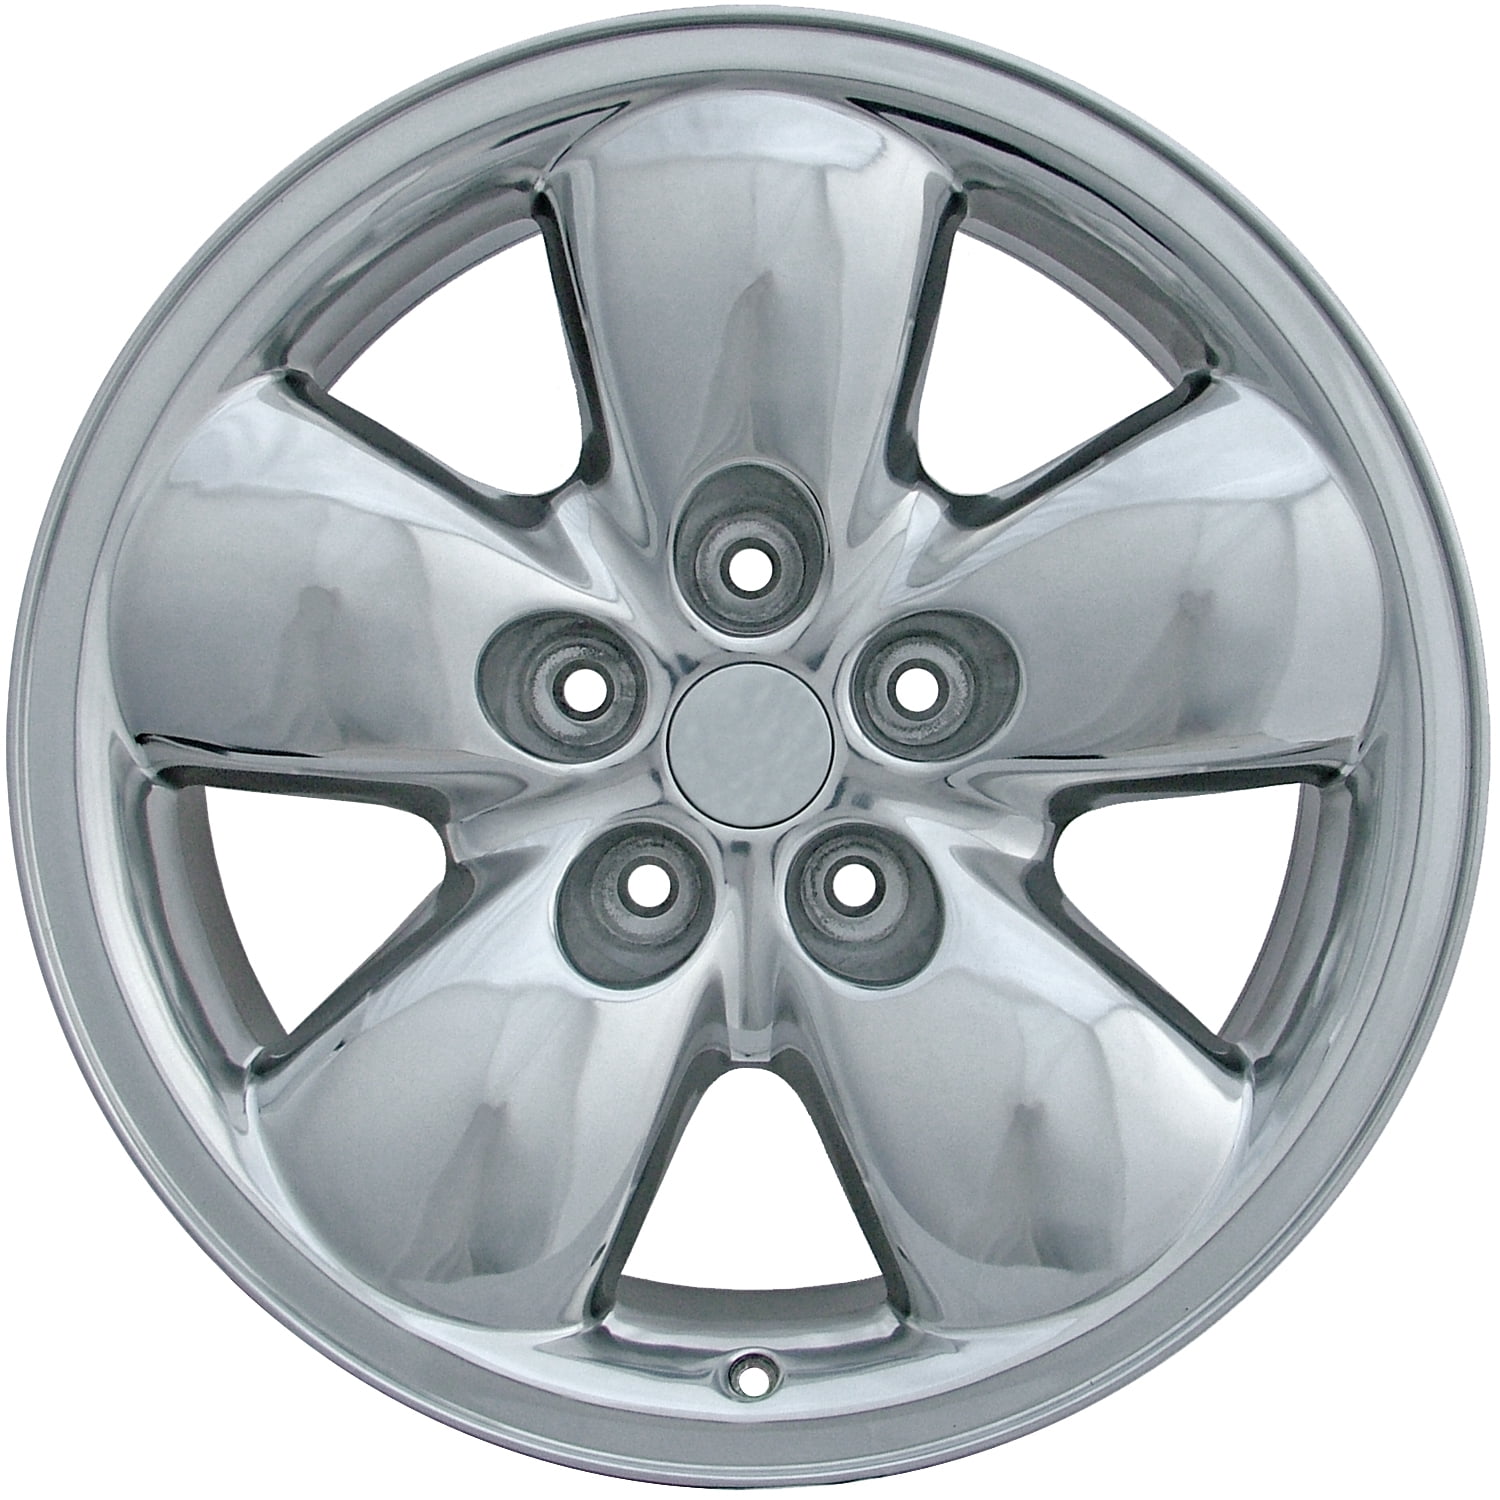 20 X 9 New Aluminum Alloy Wheel Replica, Chrome Cladded, Fits 2003-2005 20 Inch Rims For 2005 Dodge Ram 1500